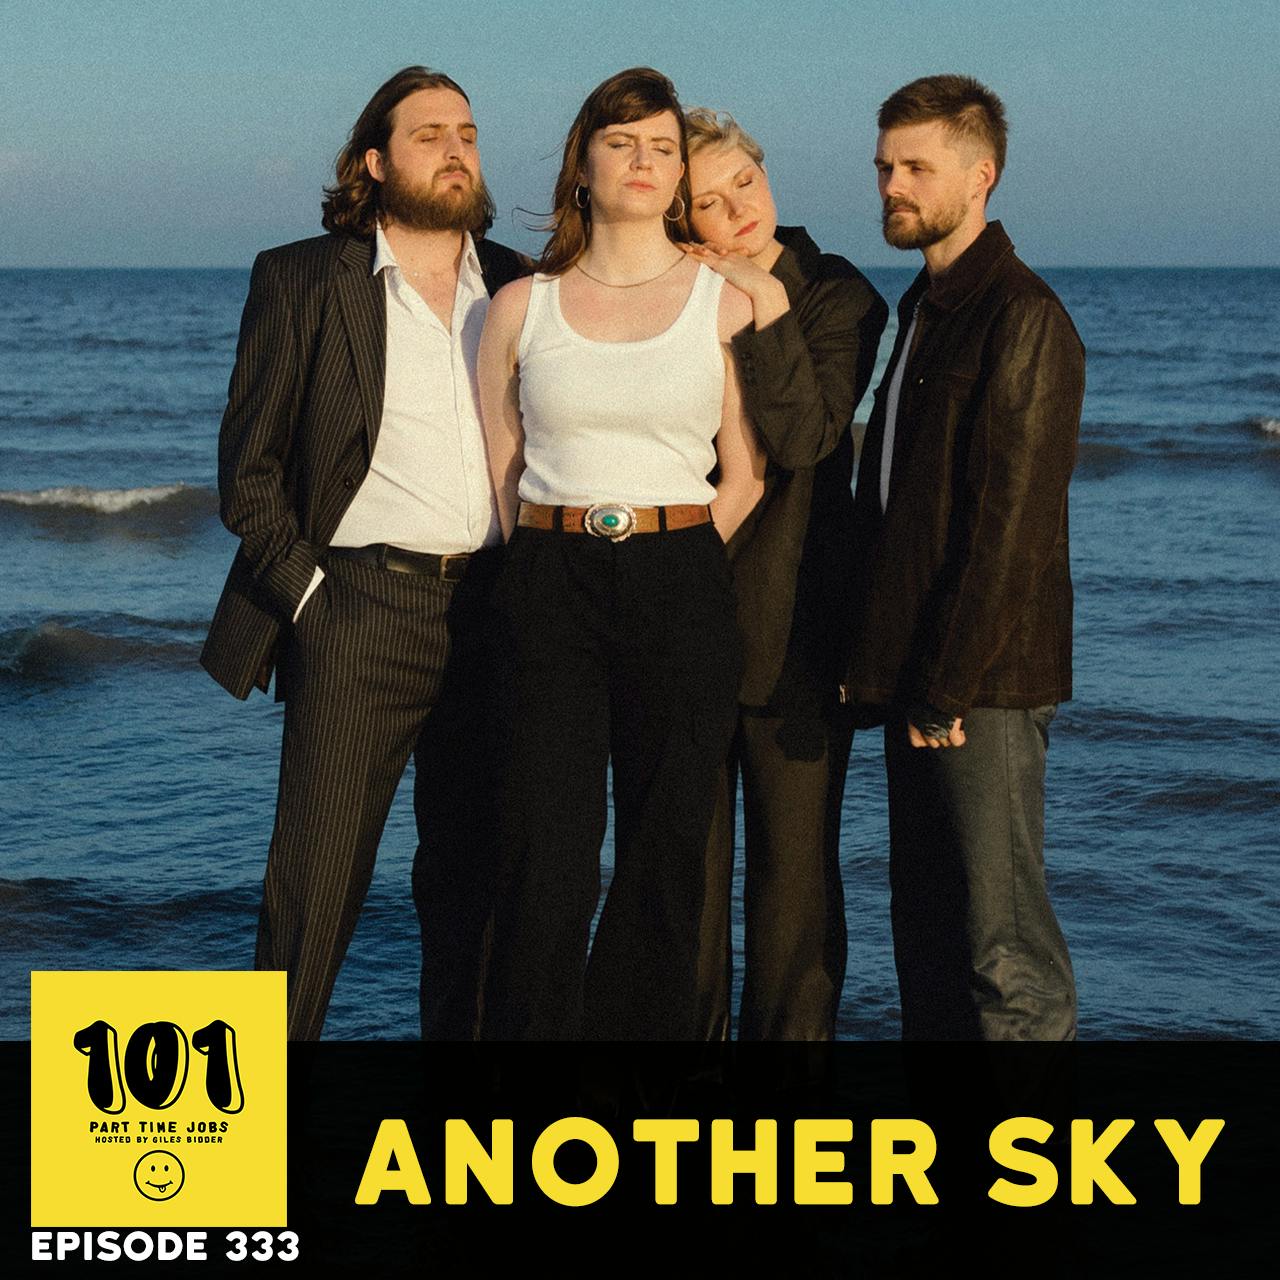 Another Sky - "I've put everything into this band"